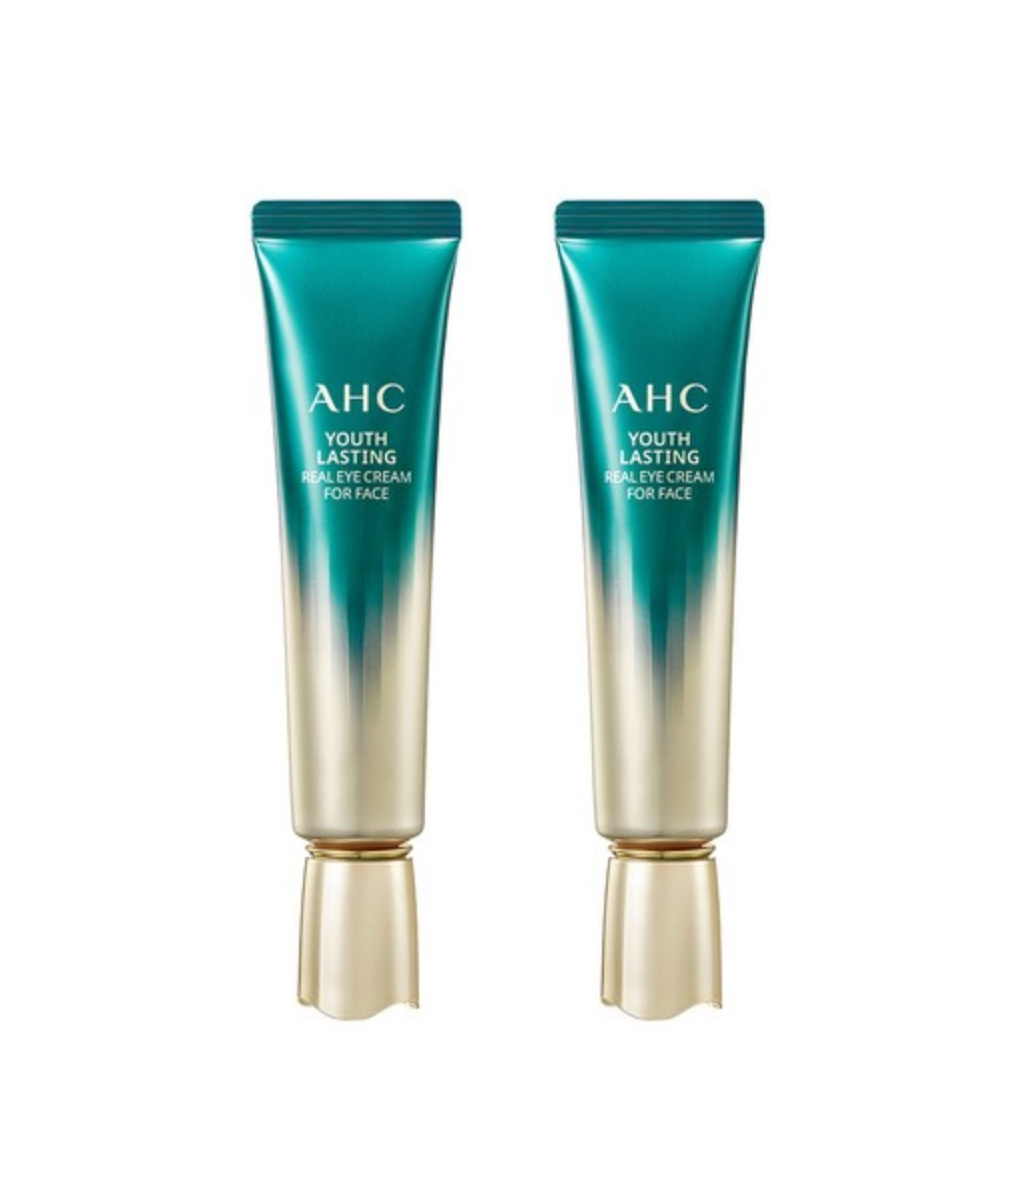 AHC Youth Lasting Real Eye Cream For Face 30ml X 2ea